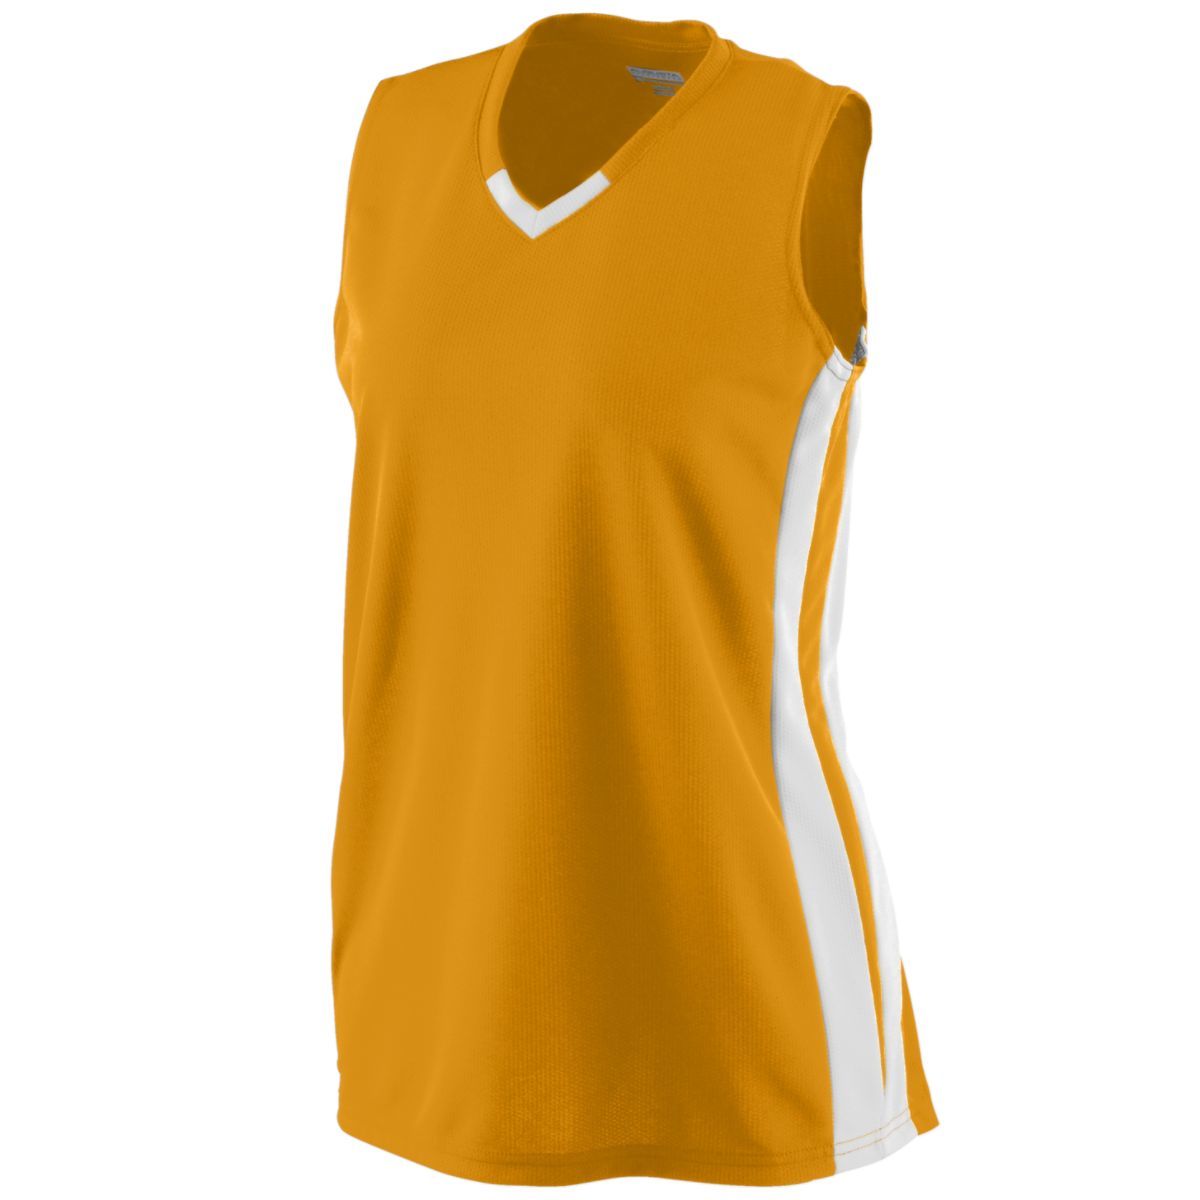 Augusta Sportswear Ladies Wicking Mesh Powerhouse Jersey in Gold/White  -Part of the Ladies, Ladies-Jersey, Augusta-Products, Softball, Shirts product lines at KanaleyCreations.com